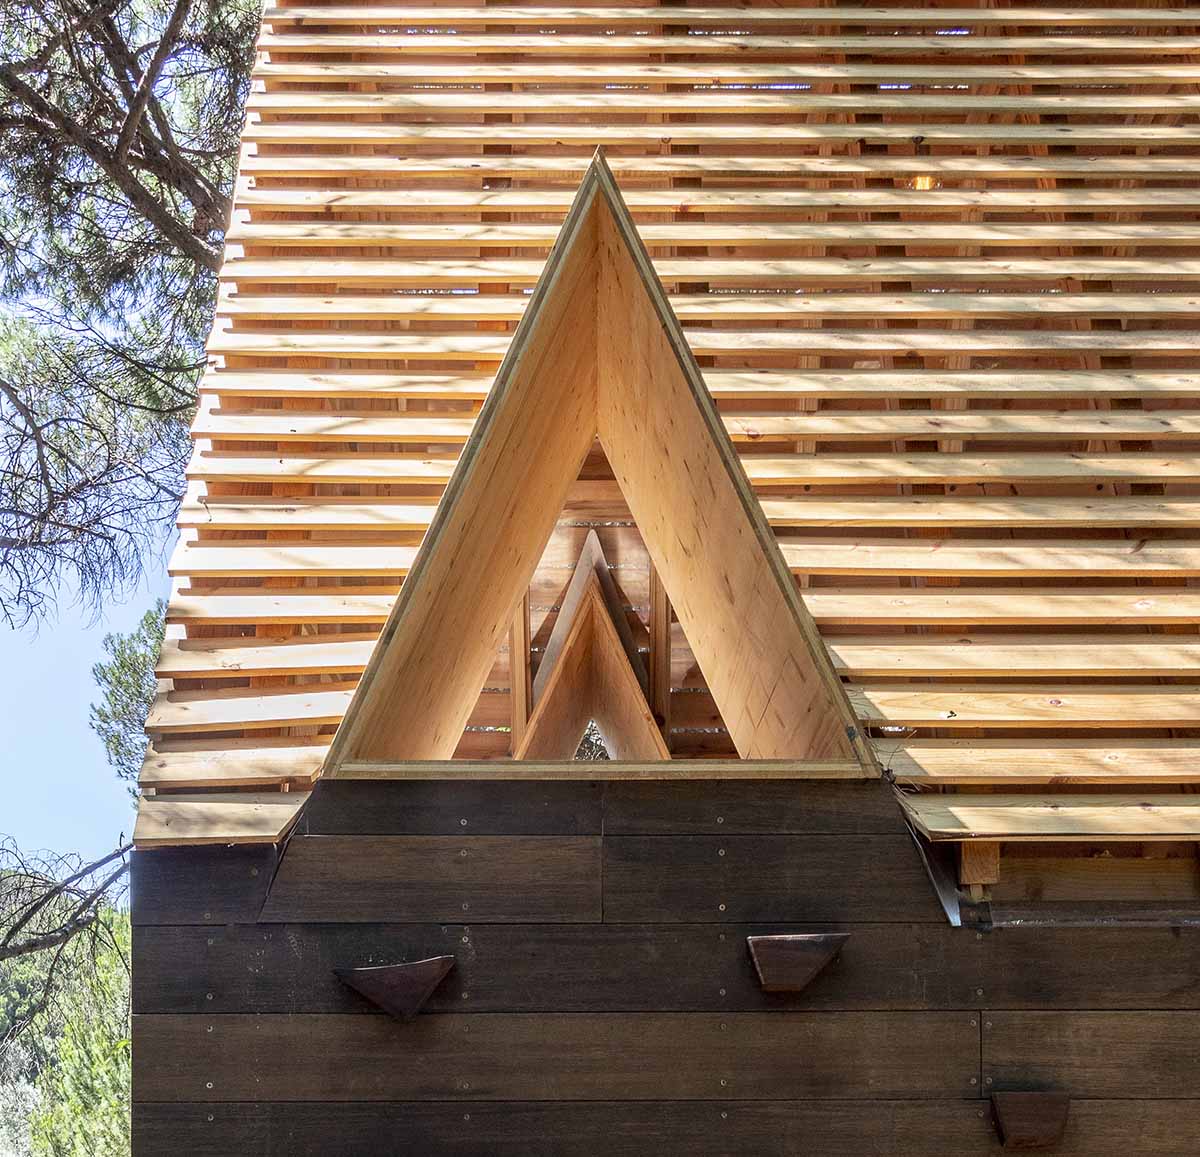 Wooden cabin by Madeiguincho is nestled among trees like an 